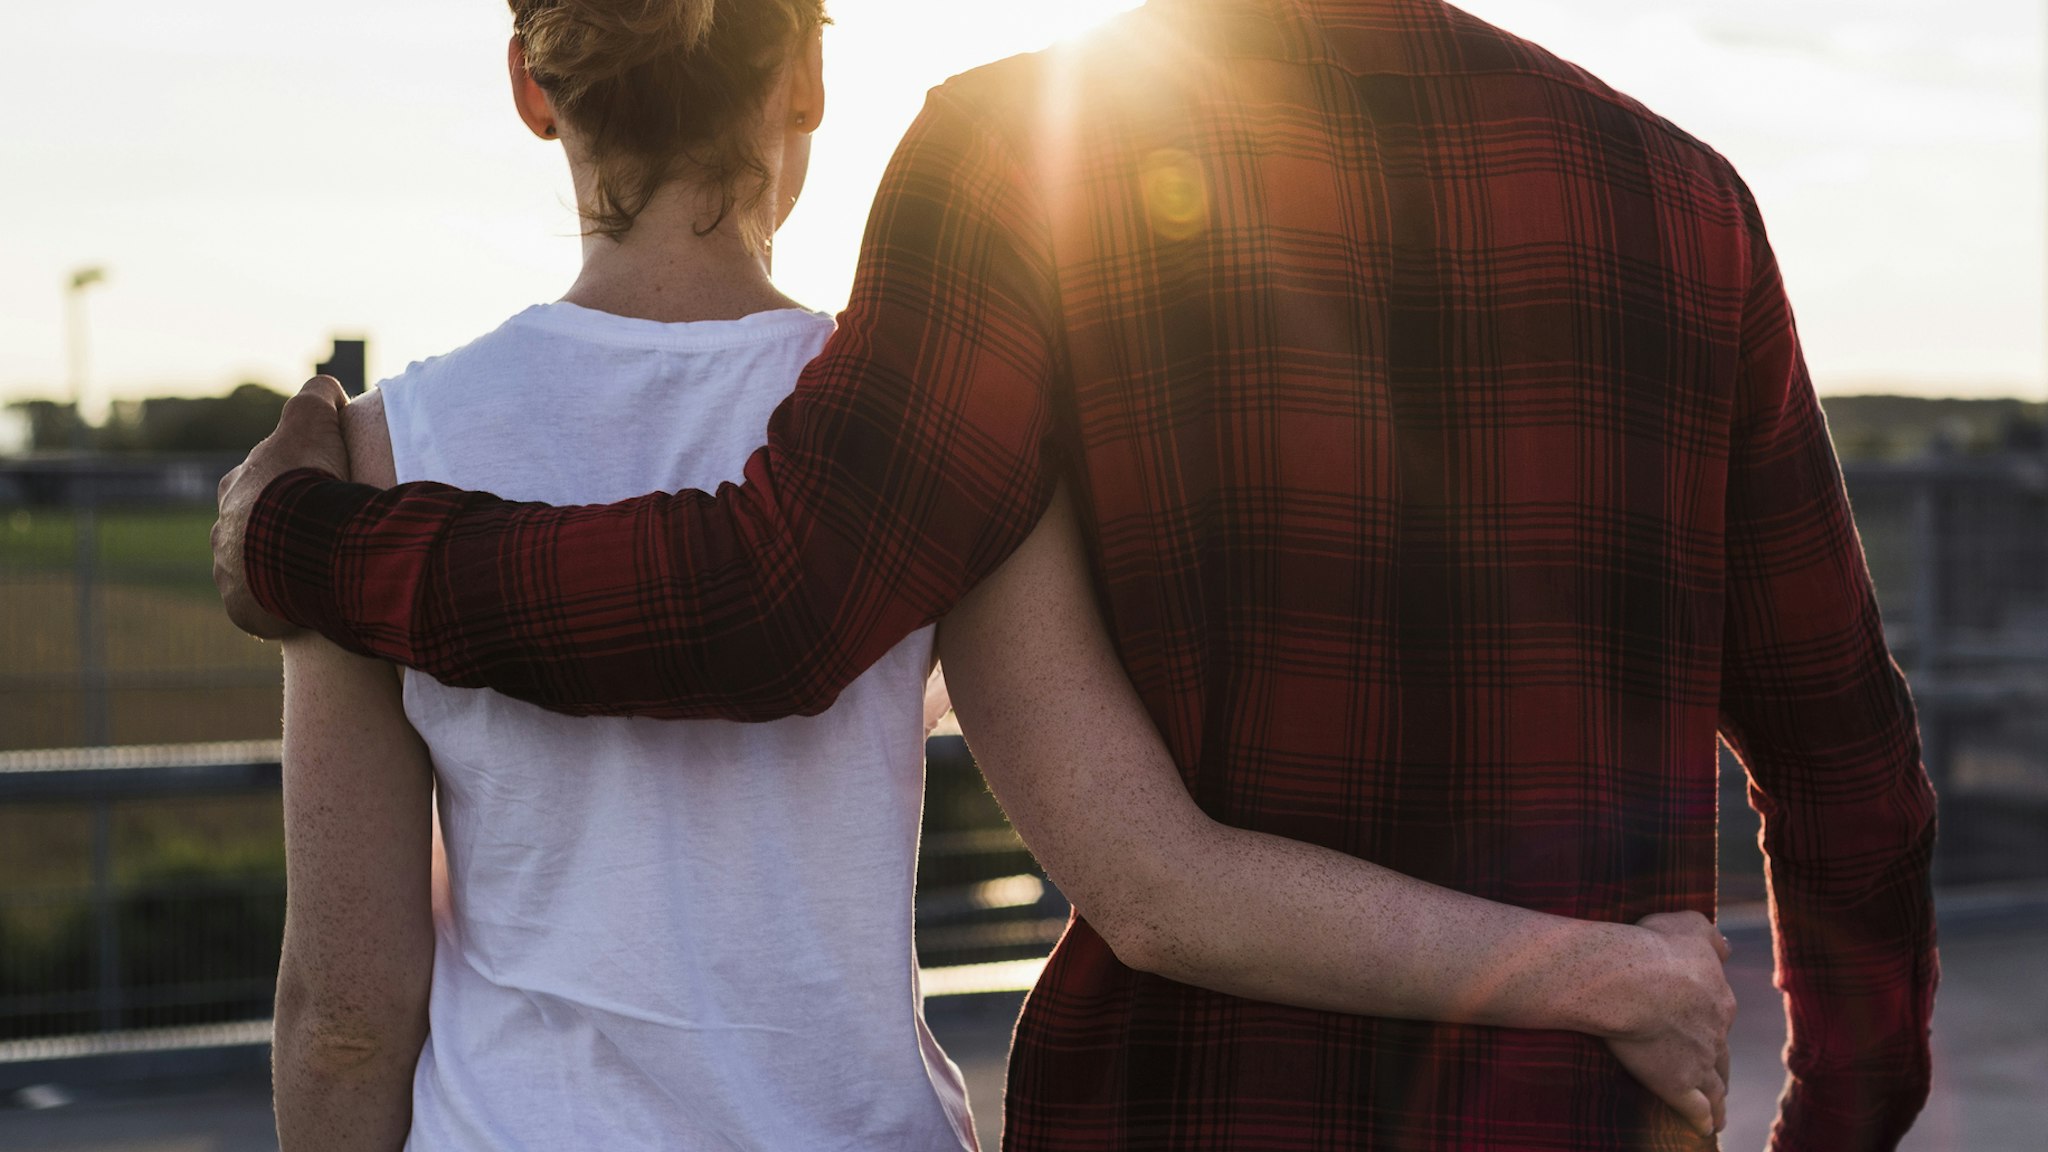 Young couple arm in arm at sunset - stock photo